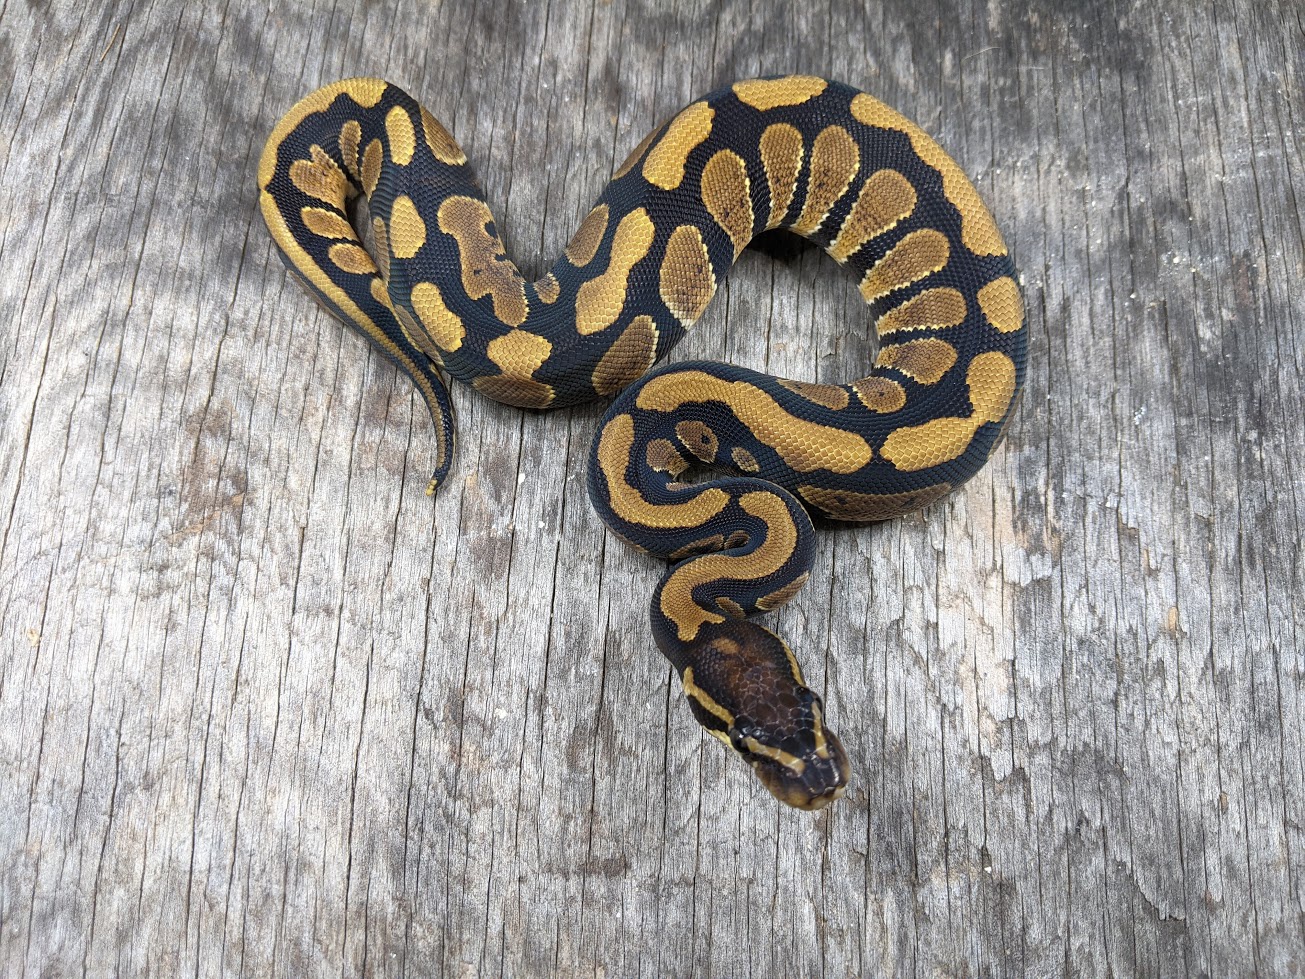 Arroyo Ball Python by Snowgyre Reptiles